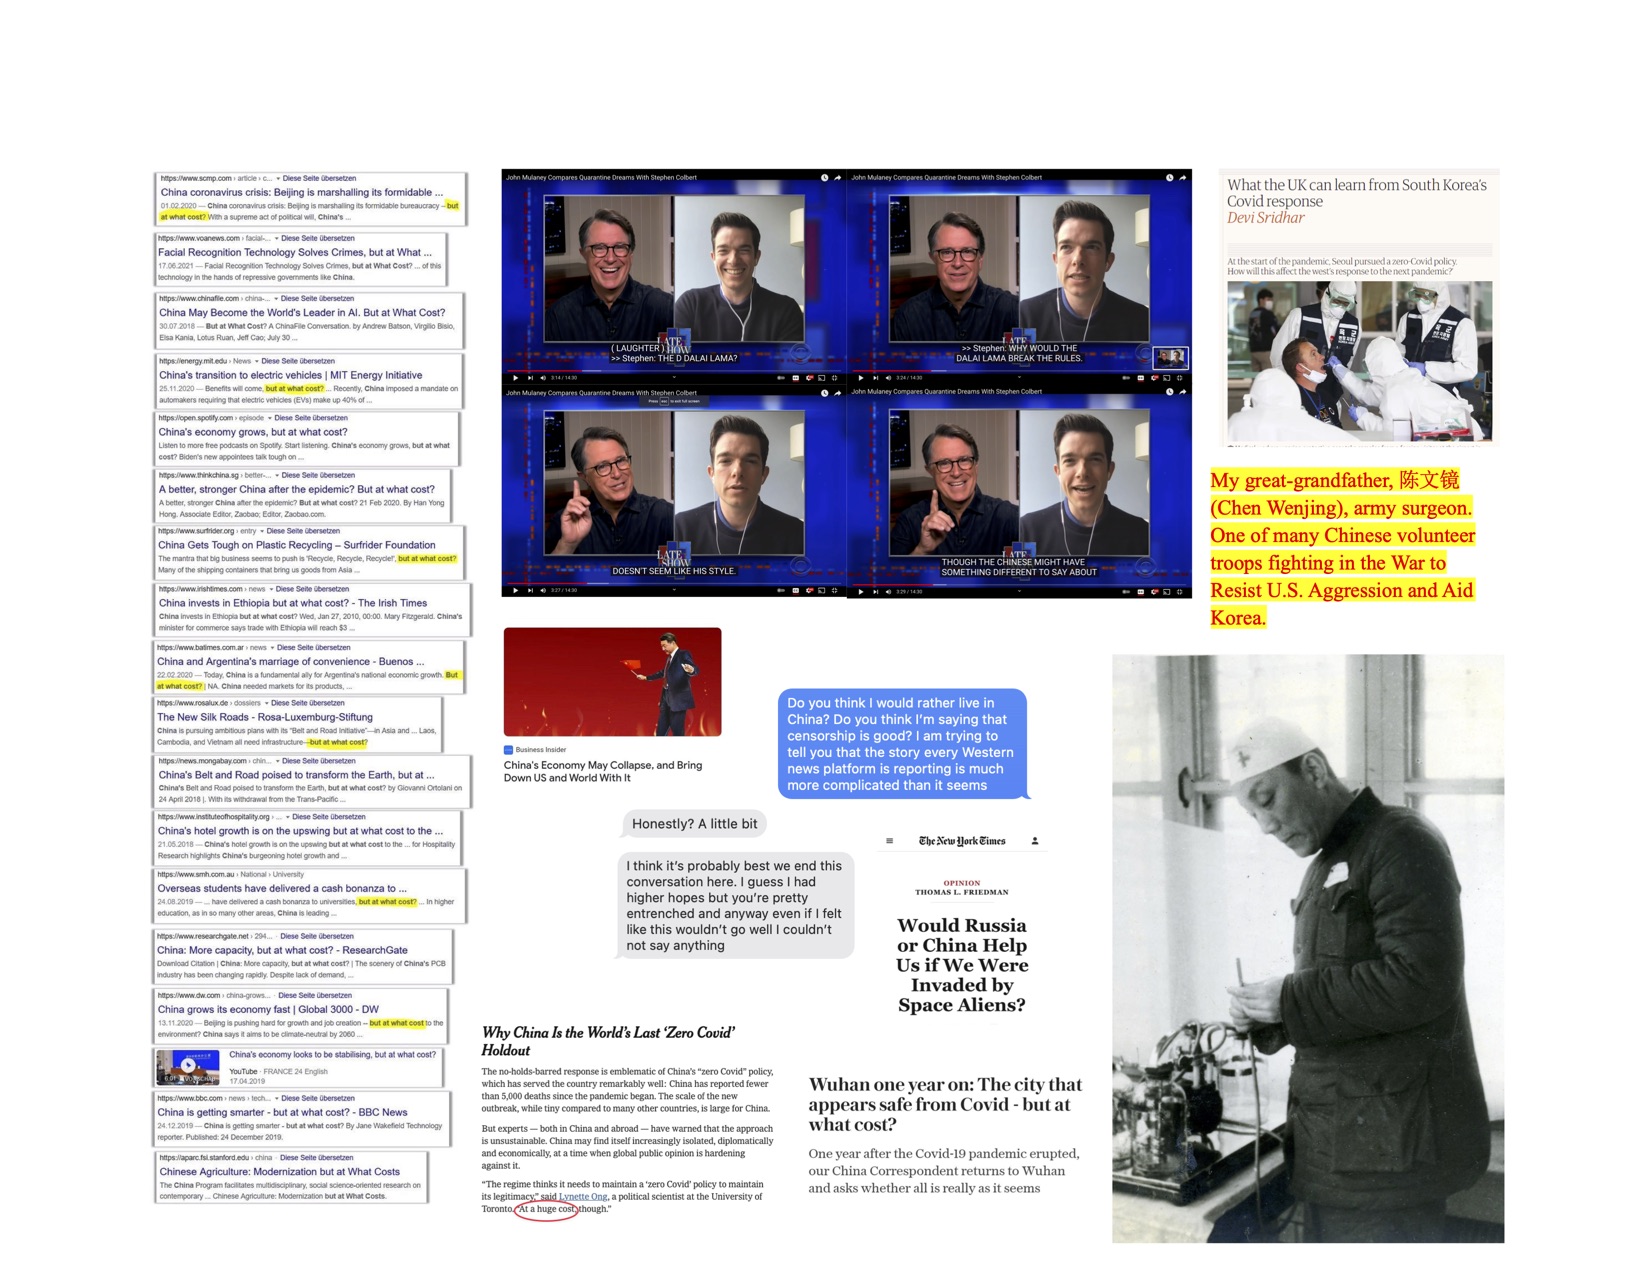 Collage of screenshots: many Google searches with key terms "China" and "but at what cost?", Covid news clippings, Colbert and Mulaney on the Dalai Lama, among other things.